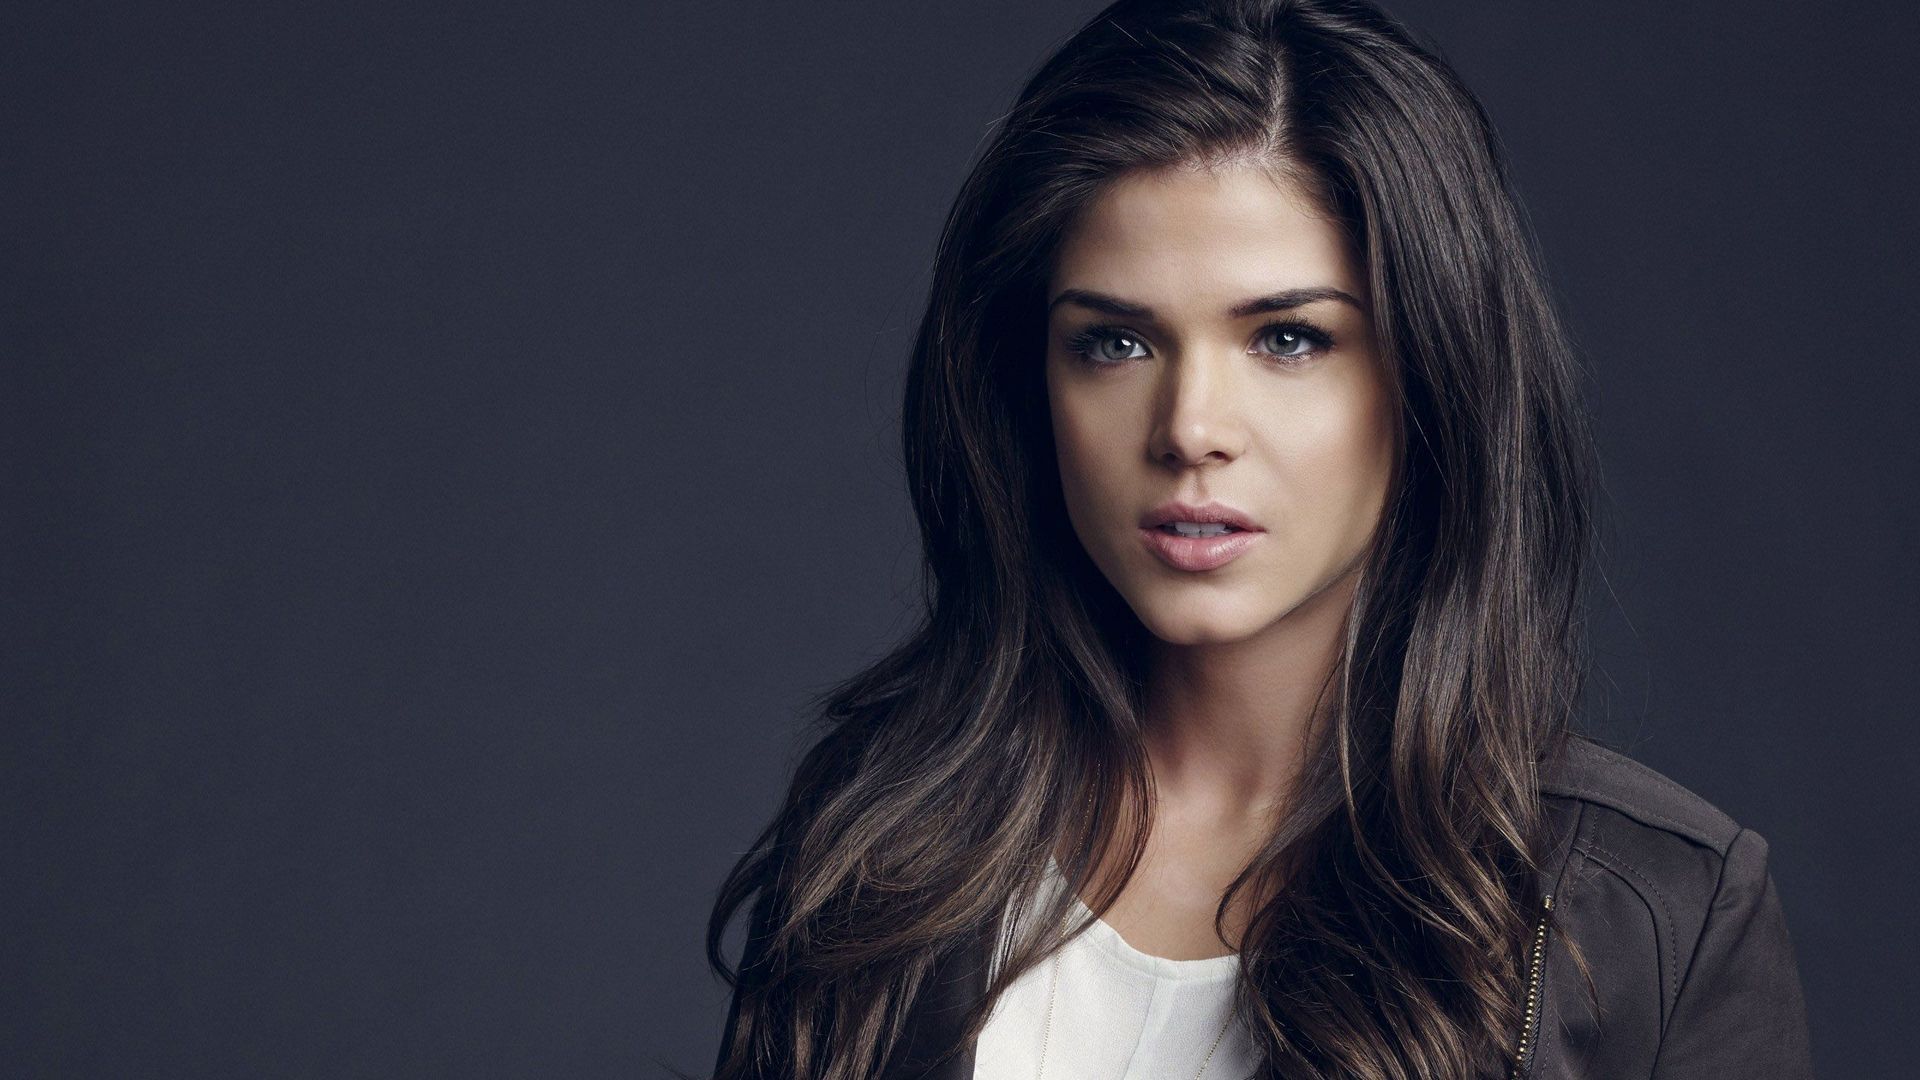 Marie Avgeropoulos The 100 wallpaper #10658